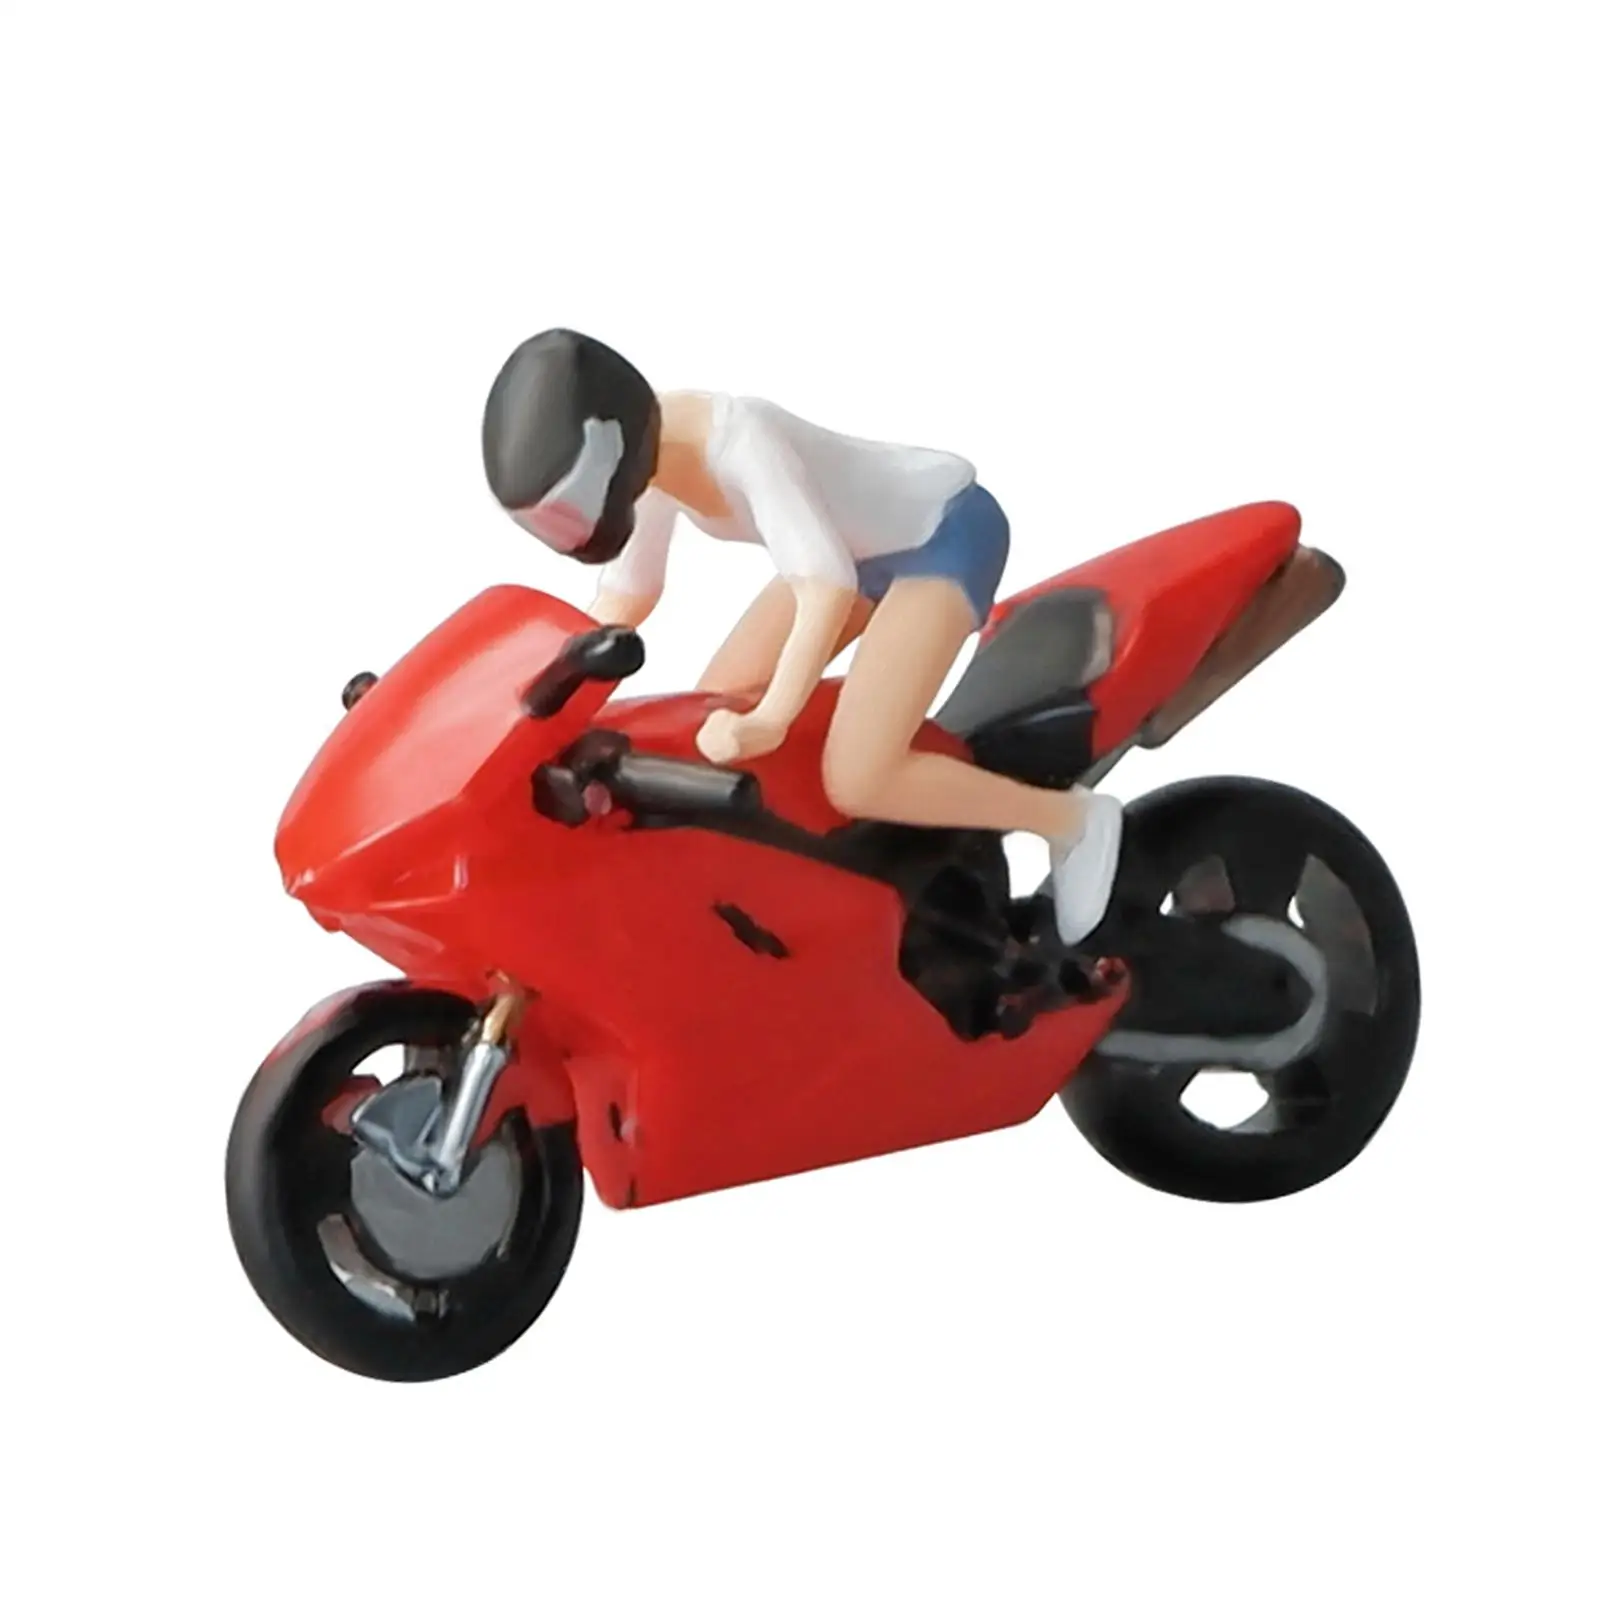 1/64 Model People Figures Ornament Realistic Figures 1/64 Motorcycle and Figures Model DIY Scene Decor Micro Landscapes Decor